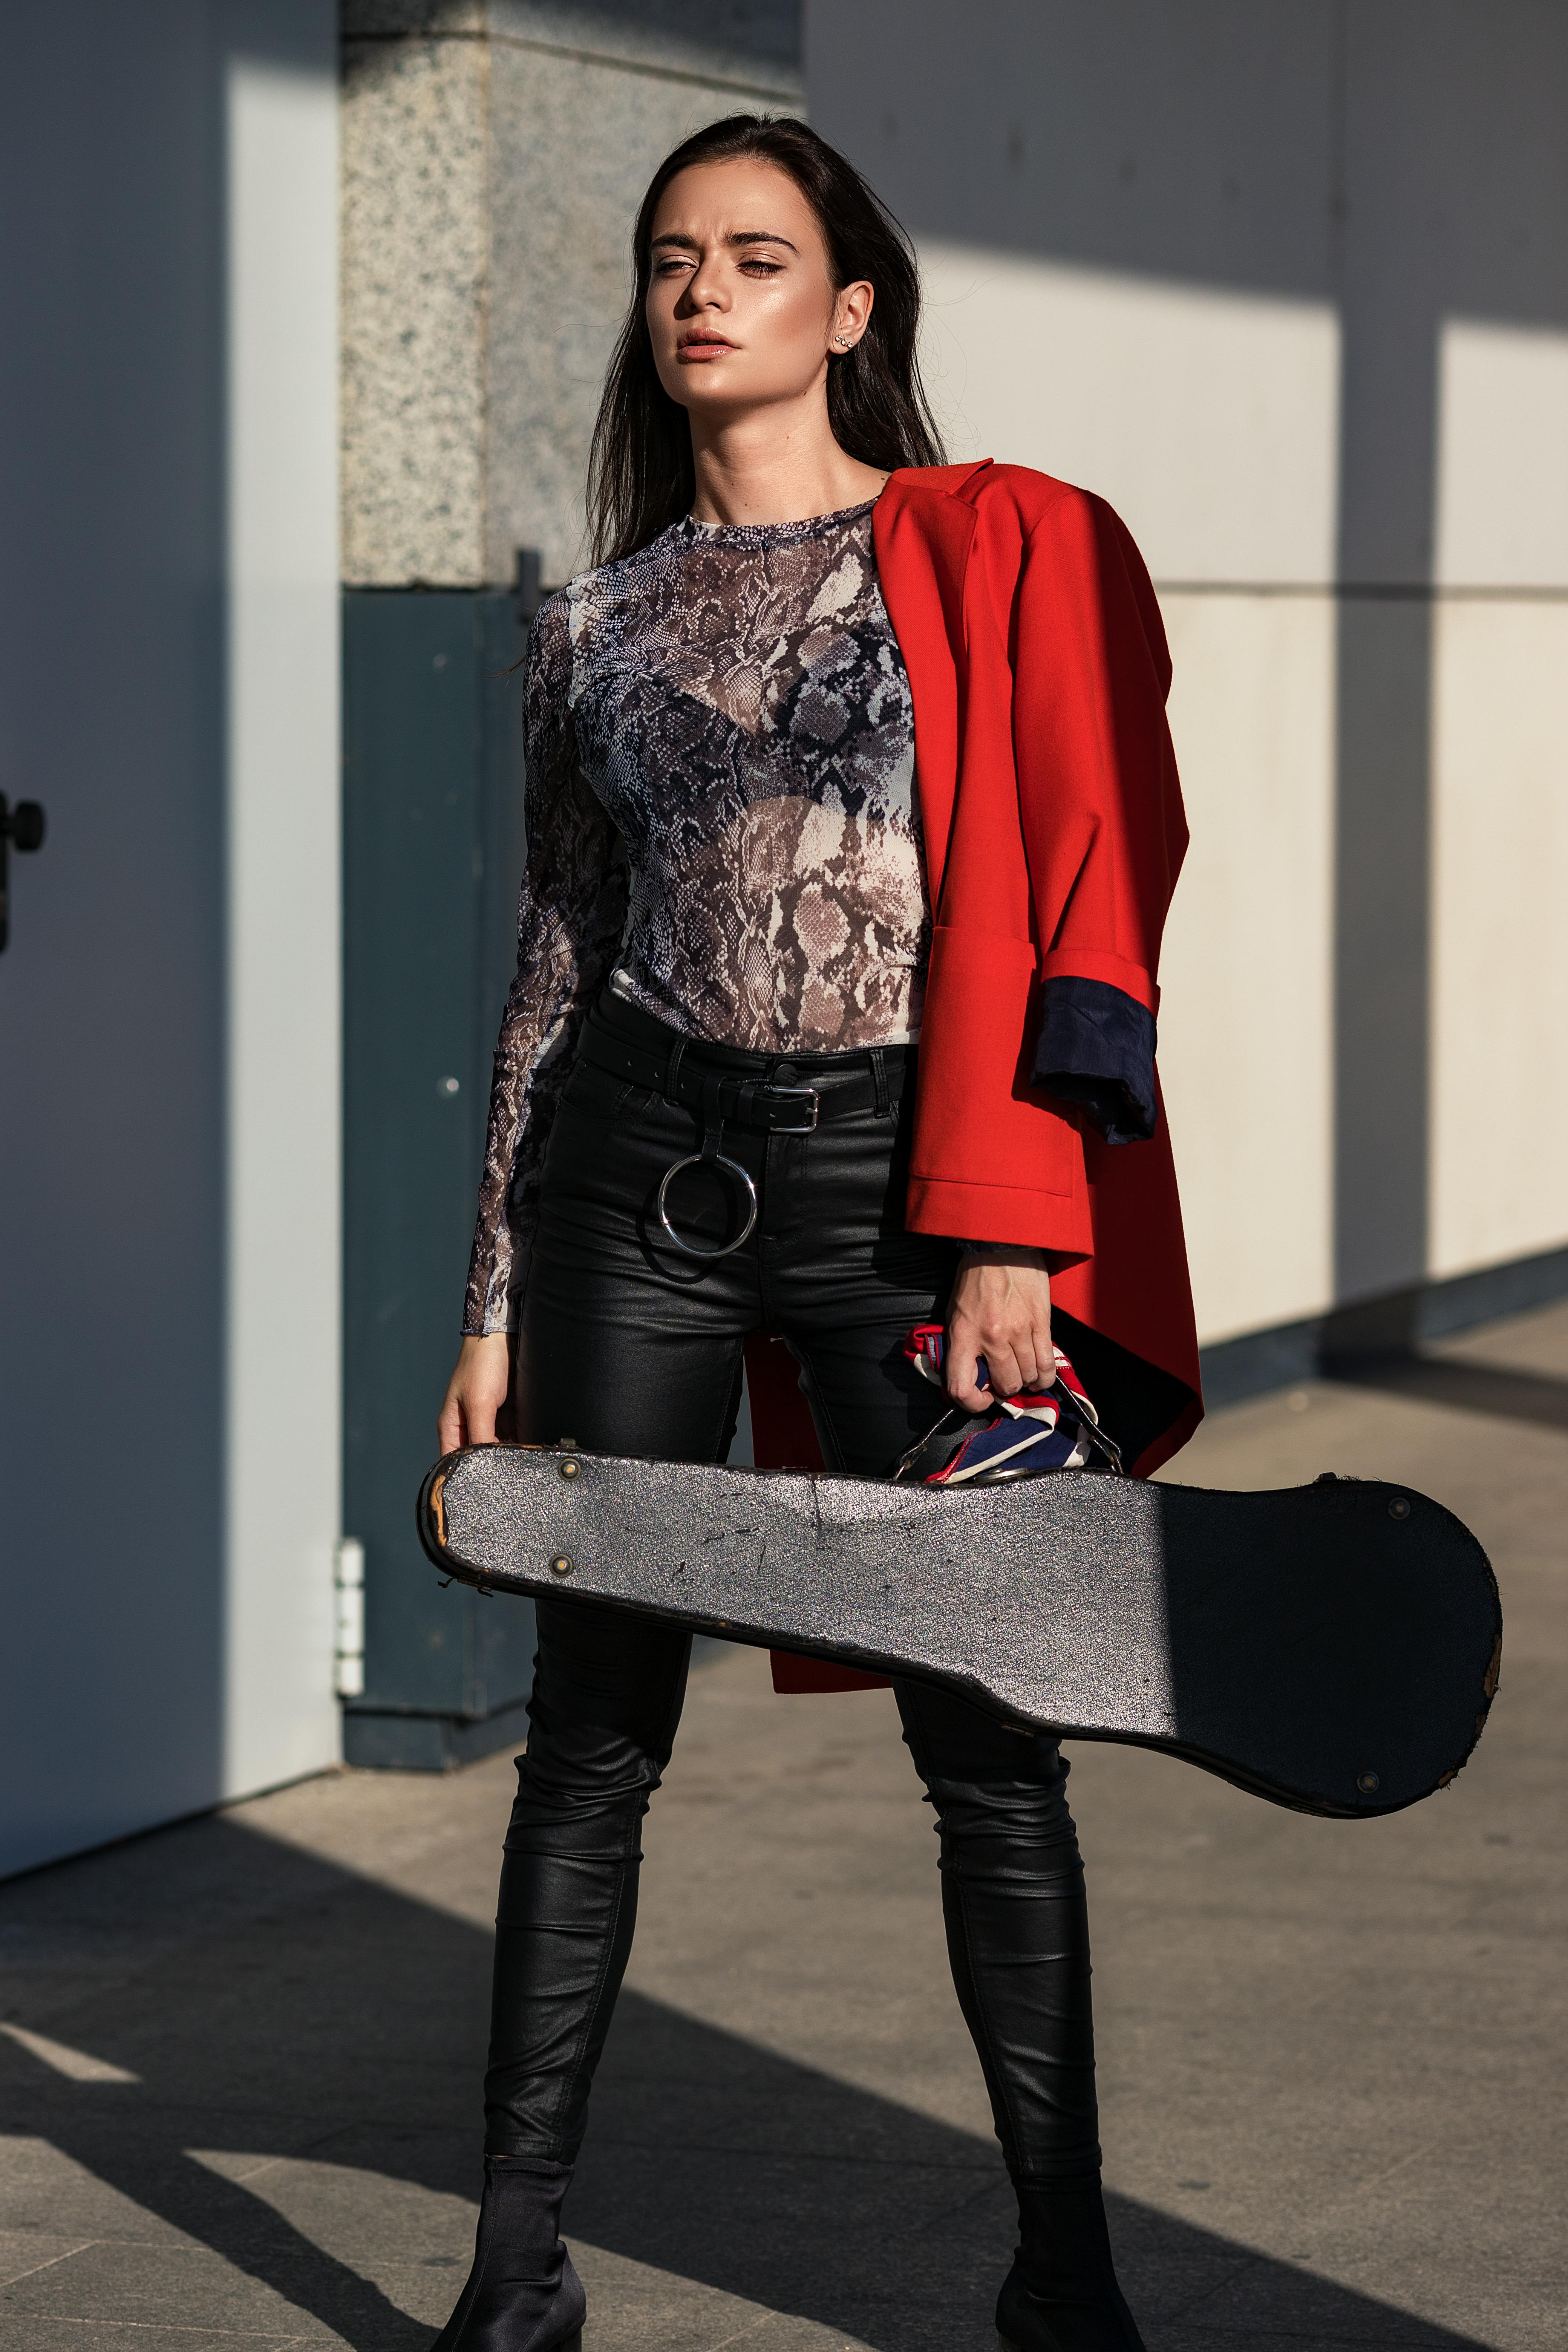 vertical shot of a model posing in red jacket and holding a violin case